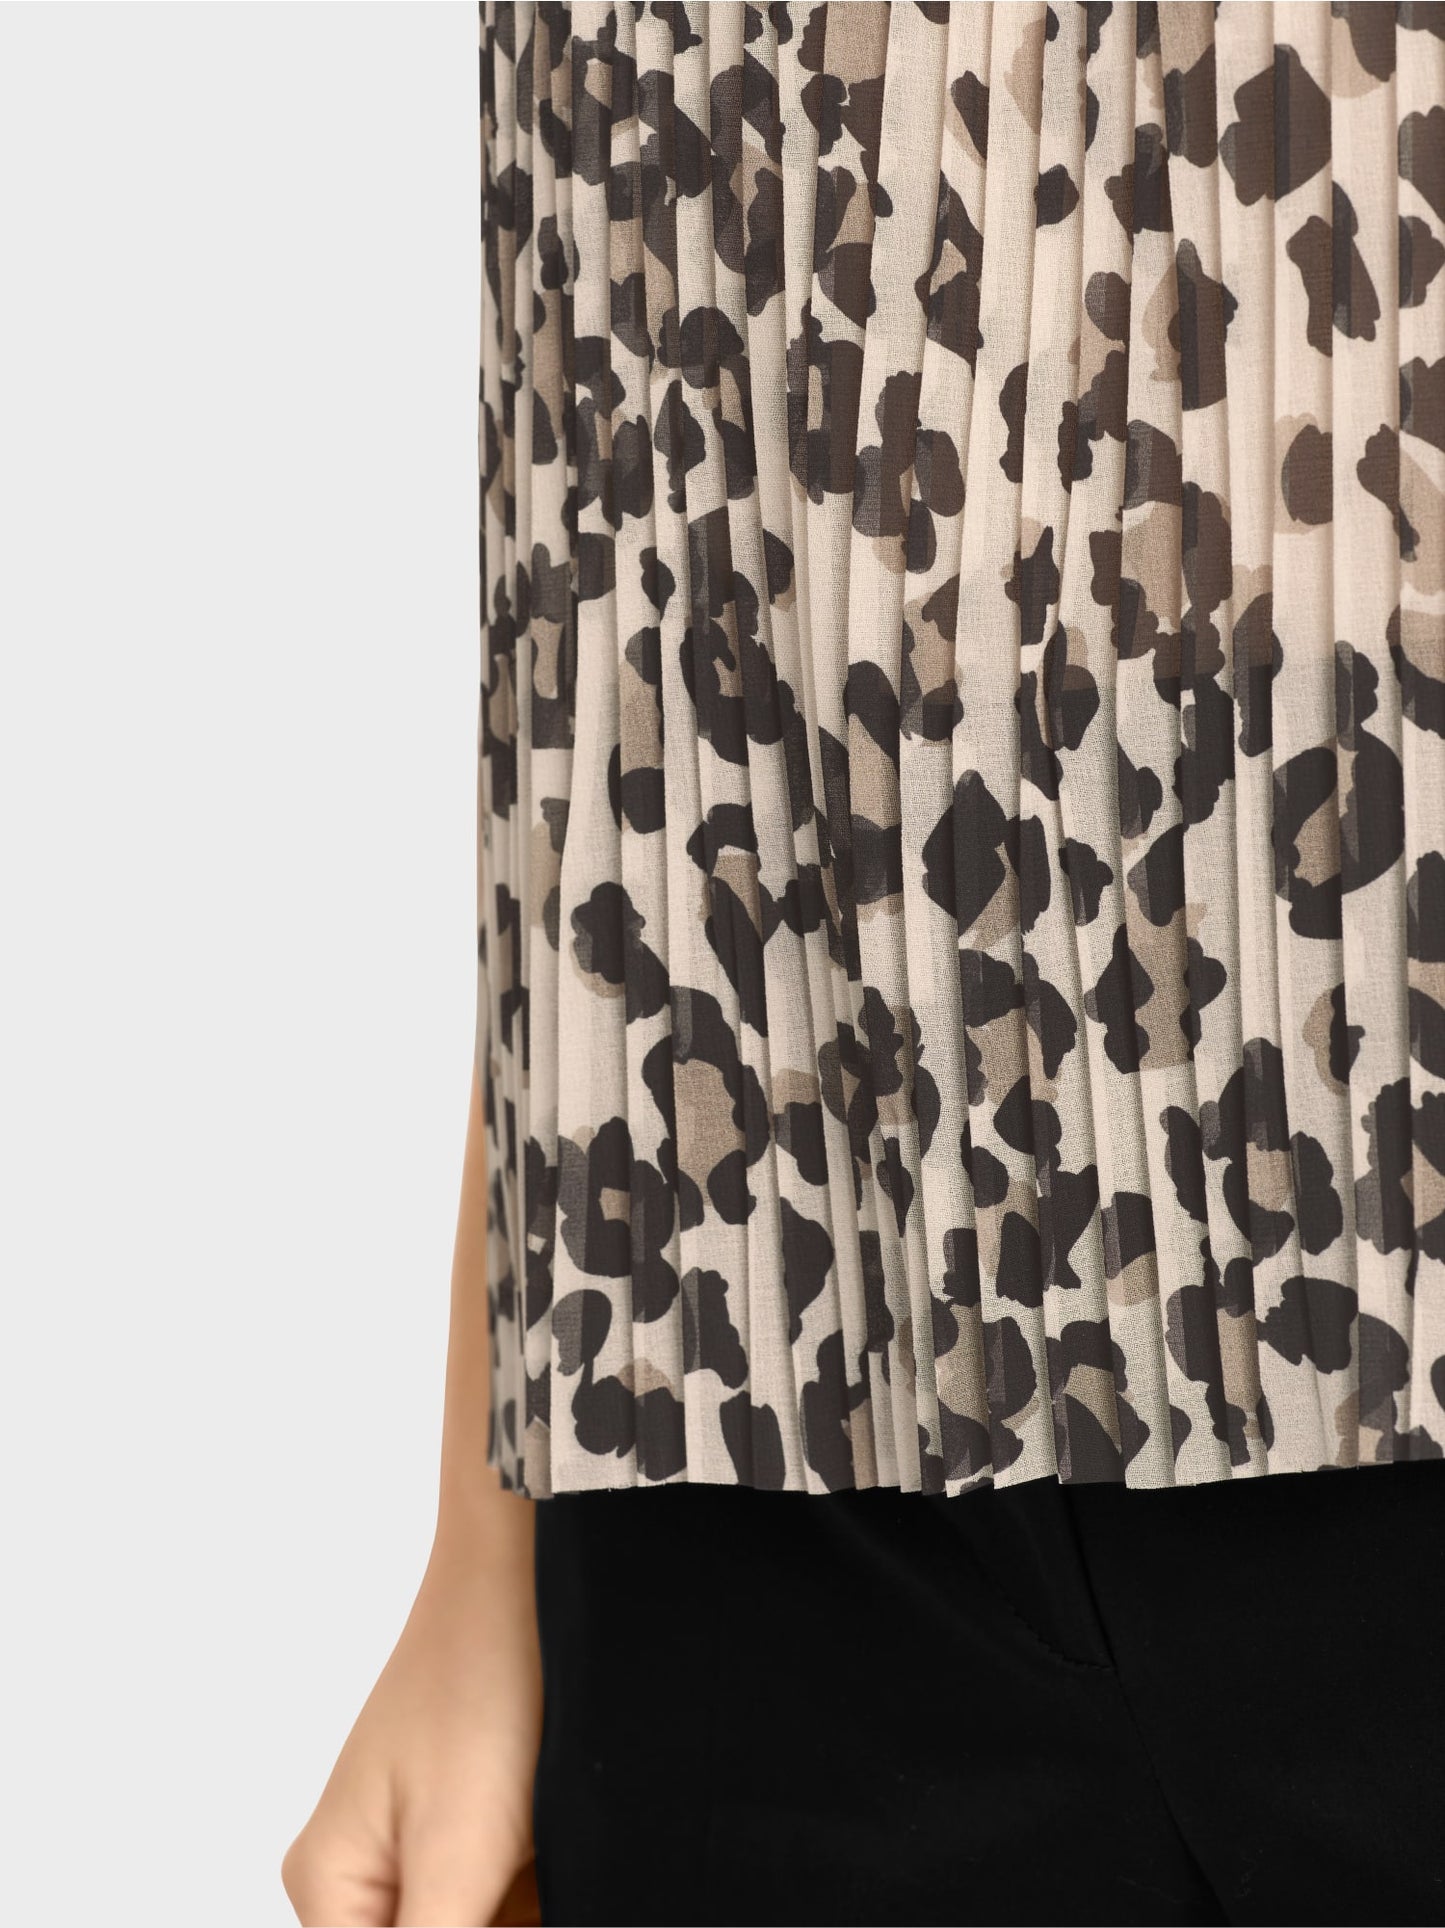 Marc Cain Pleated Leopard Top Top